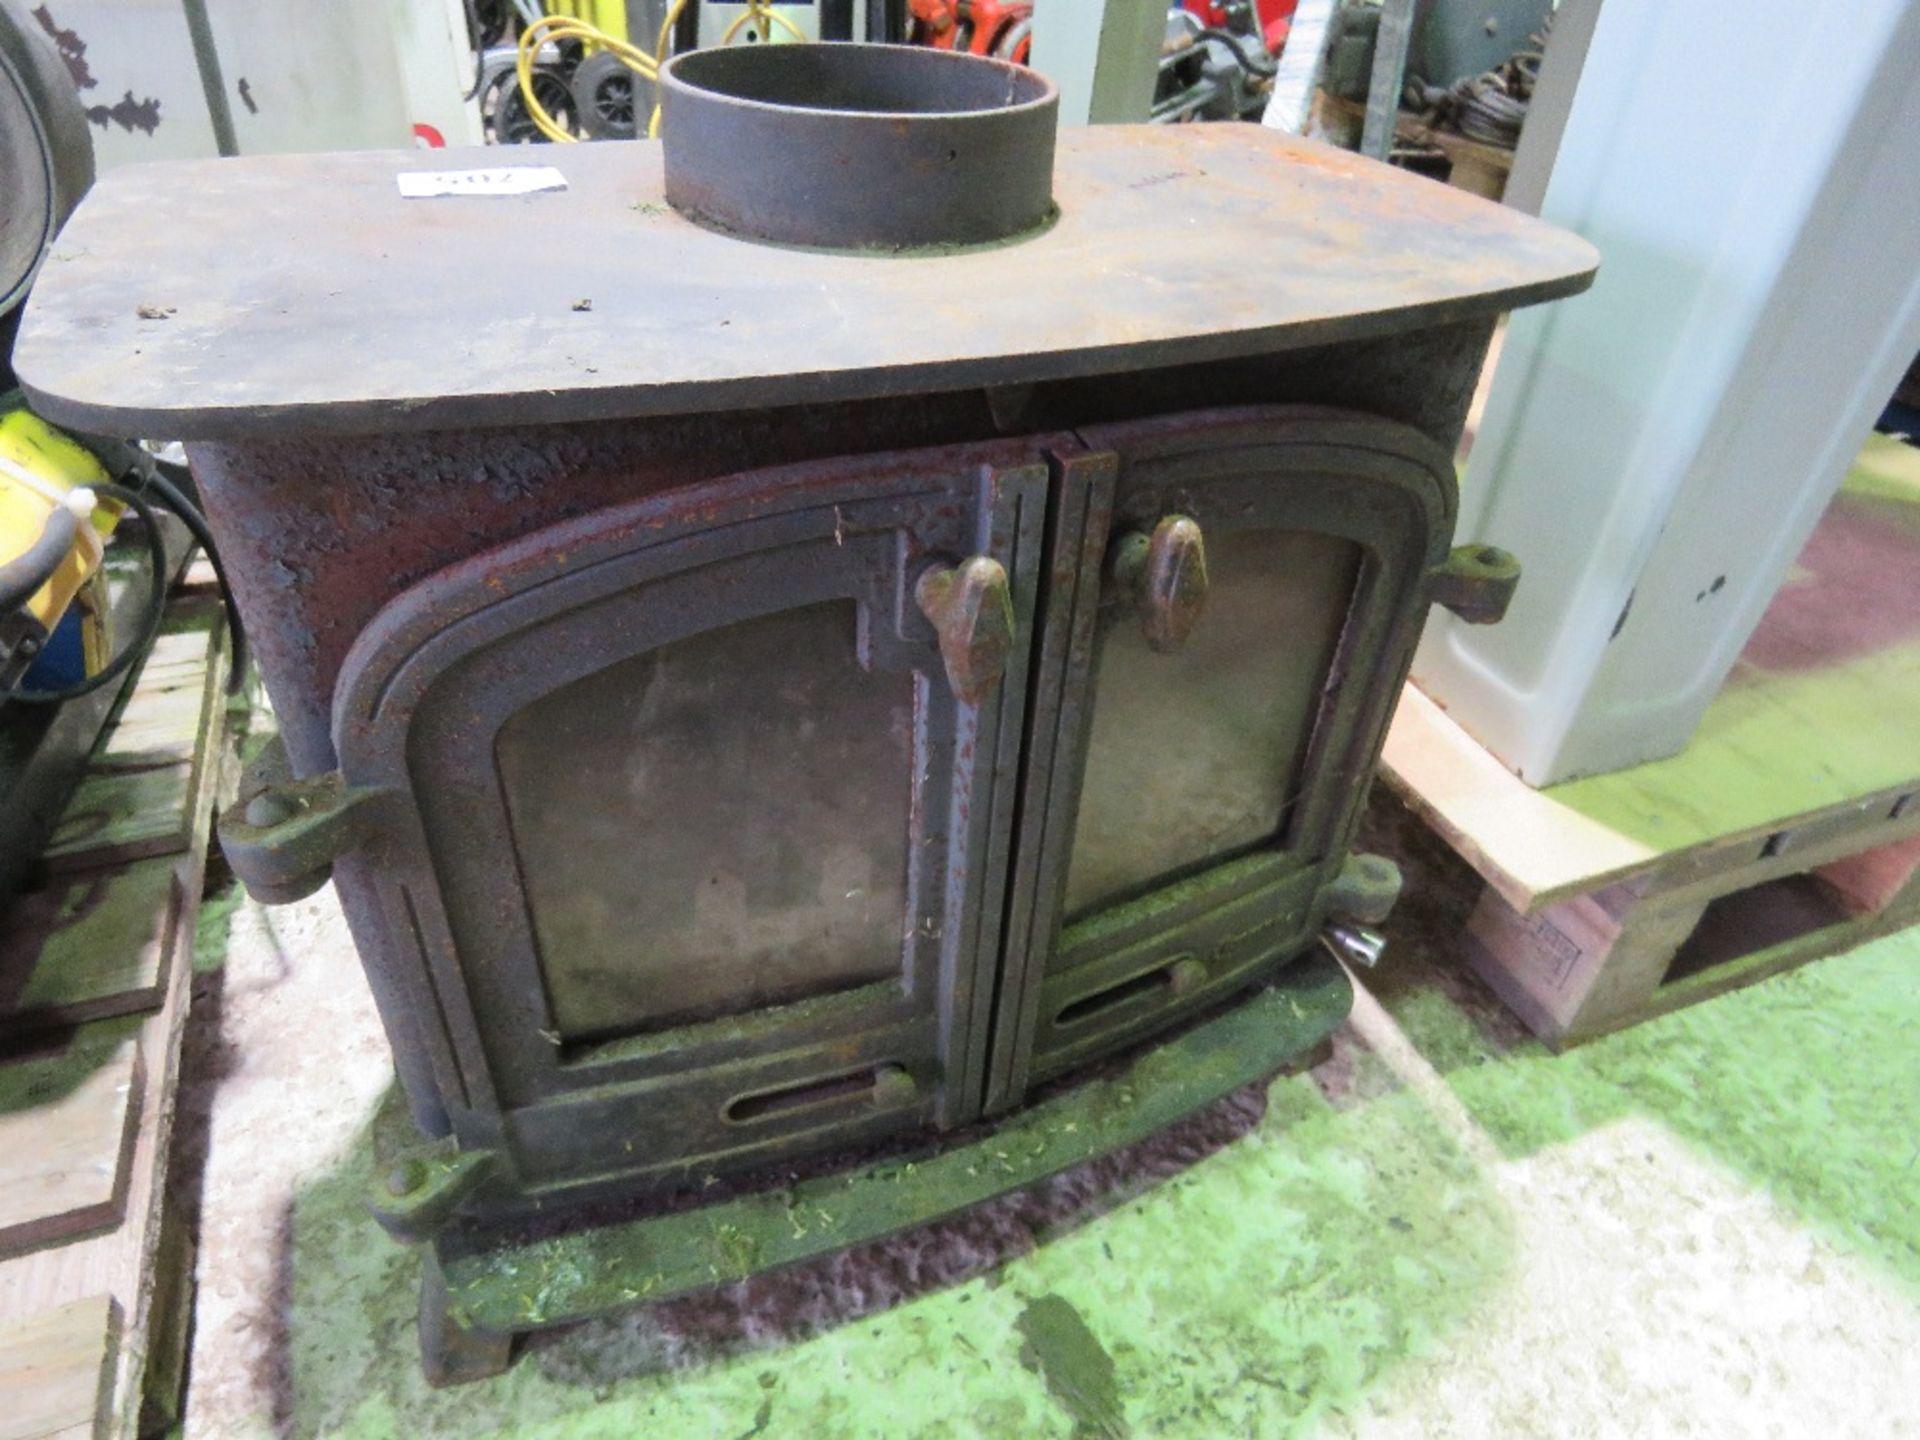 LARGE YEOMAN EXE FLAT TOPPED MULTI FUEL BURNING STOVE. THIS LOT IS SOLD UNDER THE AUCTIONEERS